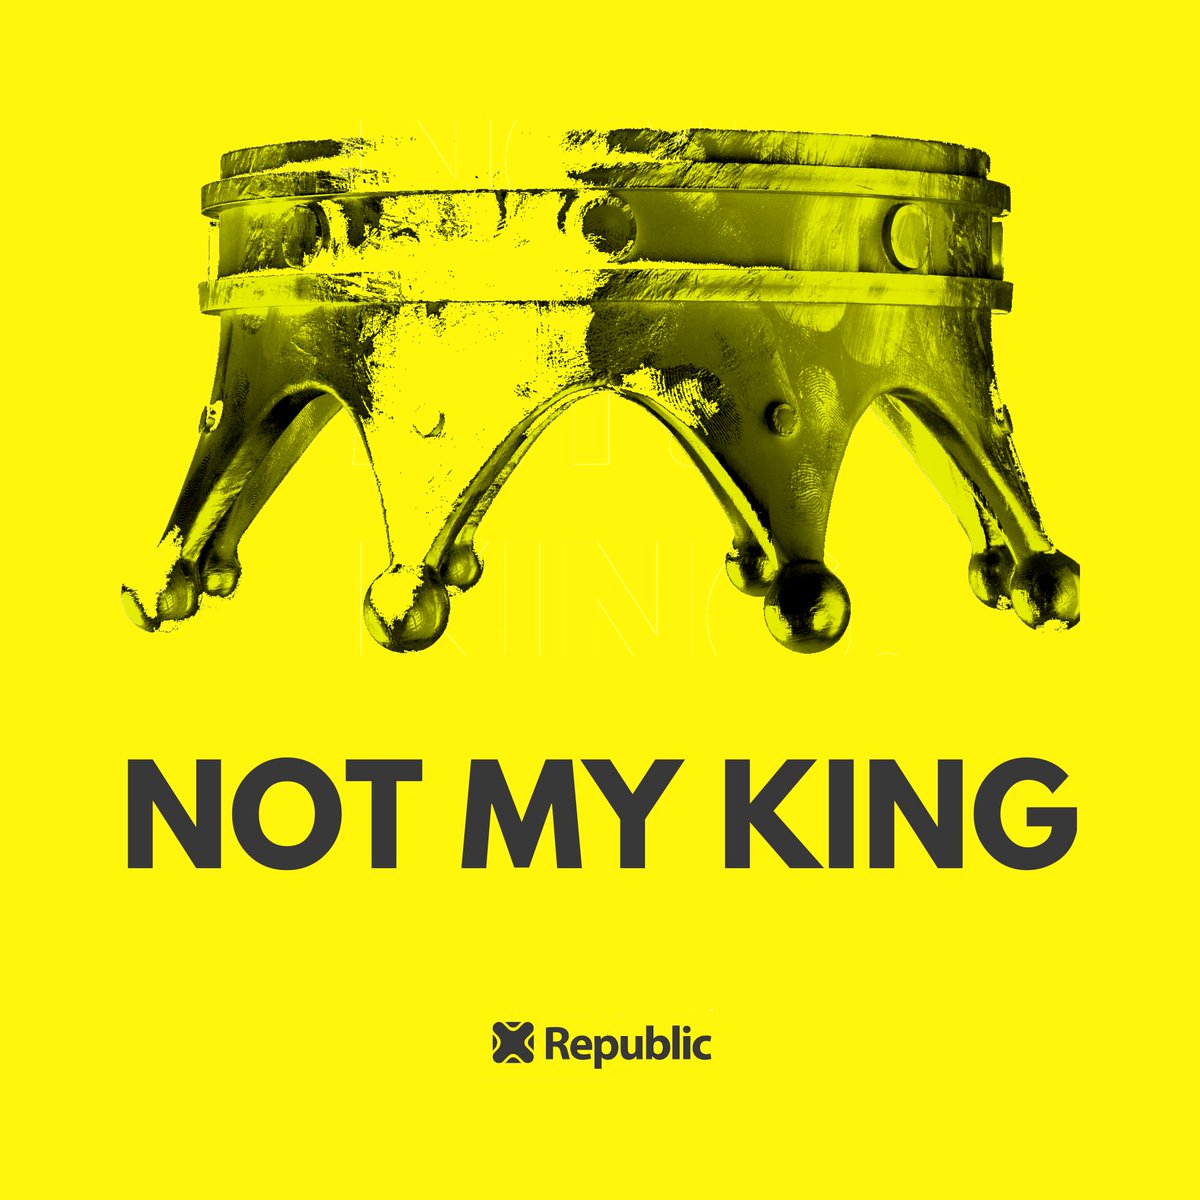 Charles doesn't represent the people of this country. That's why we'll be chanting #NotMyKing on #RepublicDay. #AbolishTheMonarchy